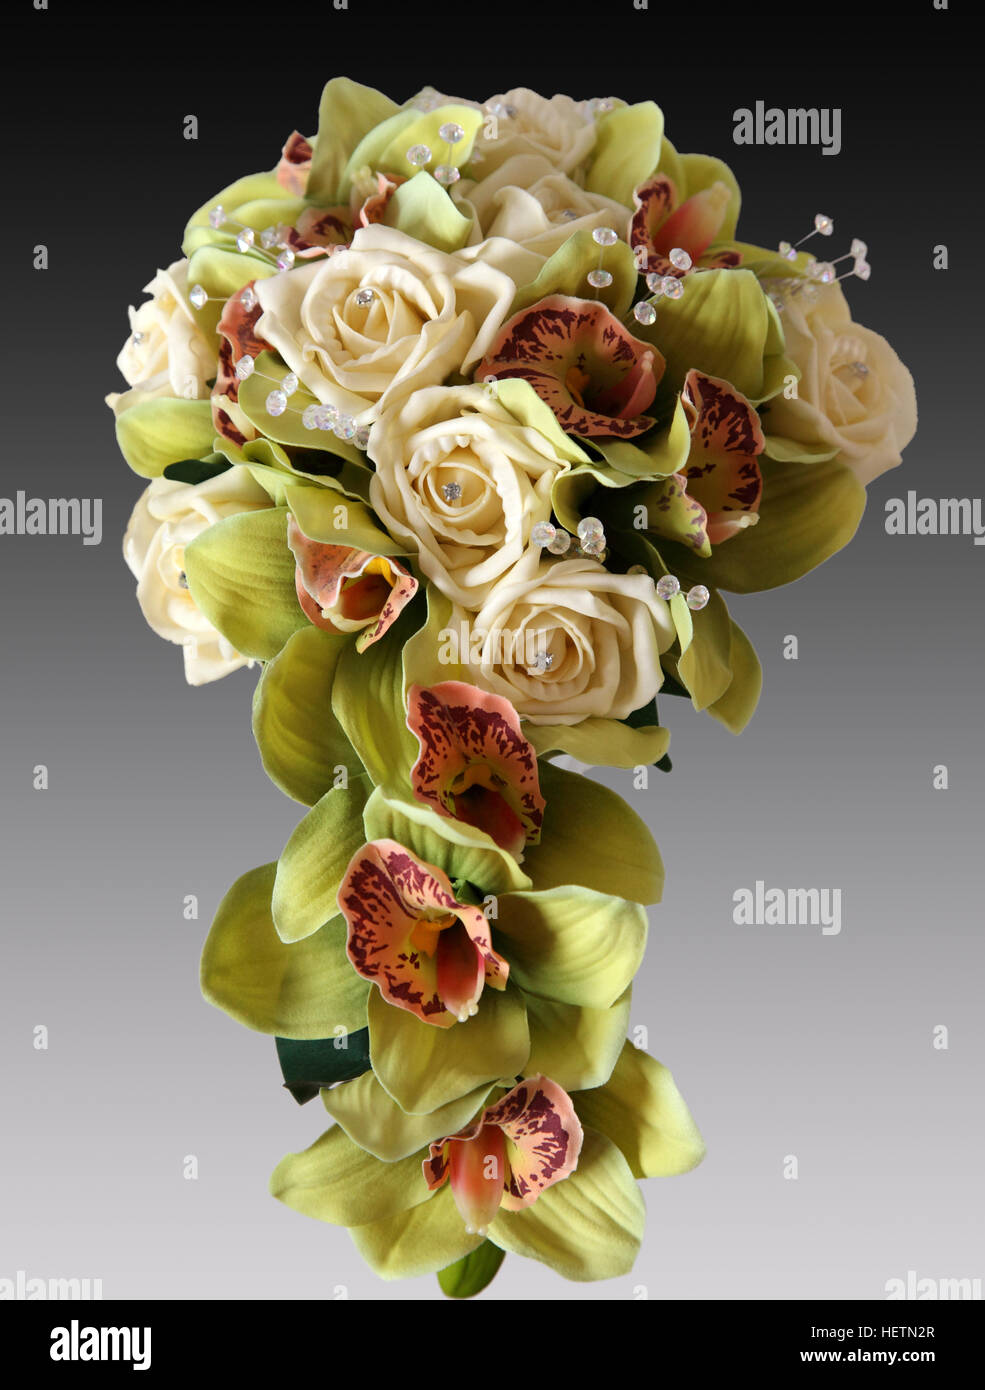 Wedding bouquet made from orchids and roses in cream and peach colours on a fading background Stock Photo